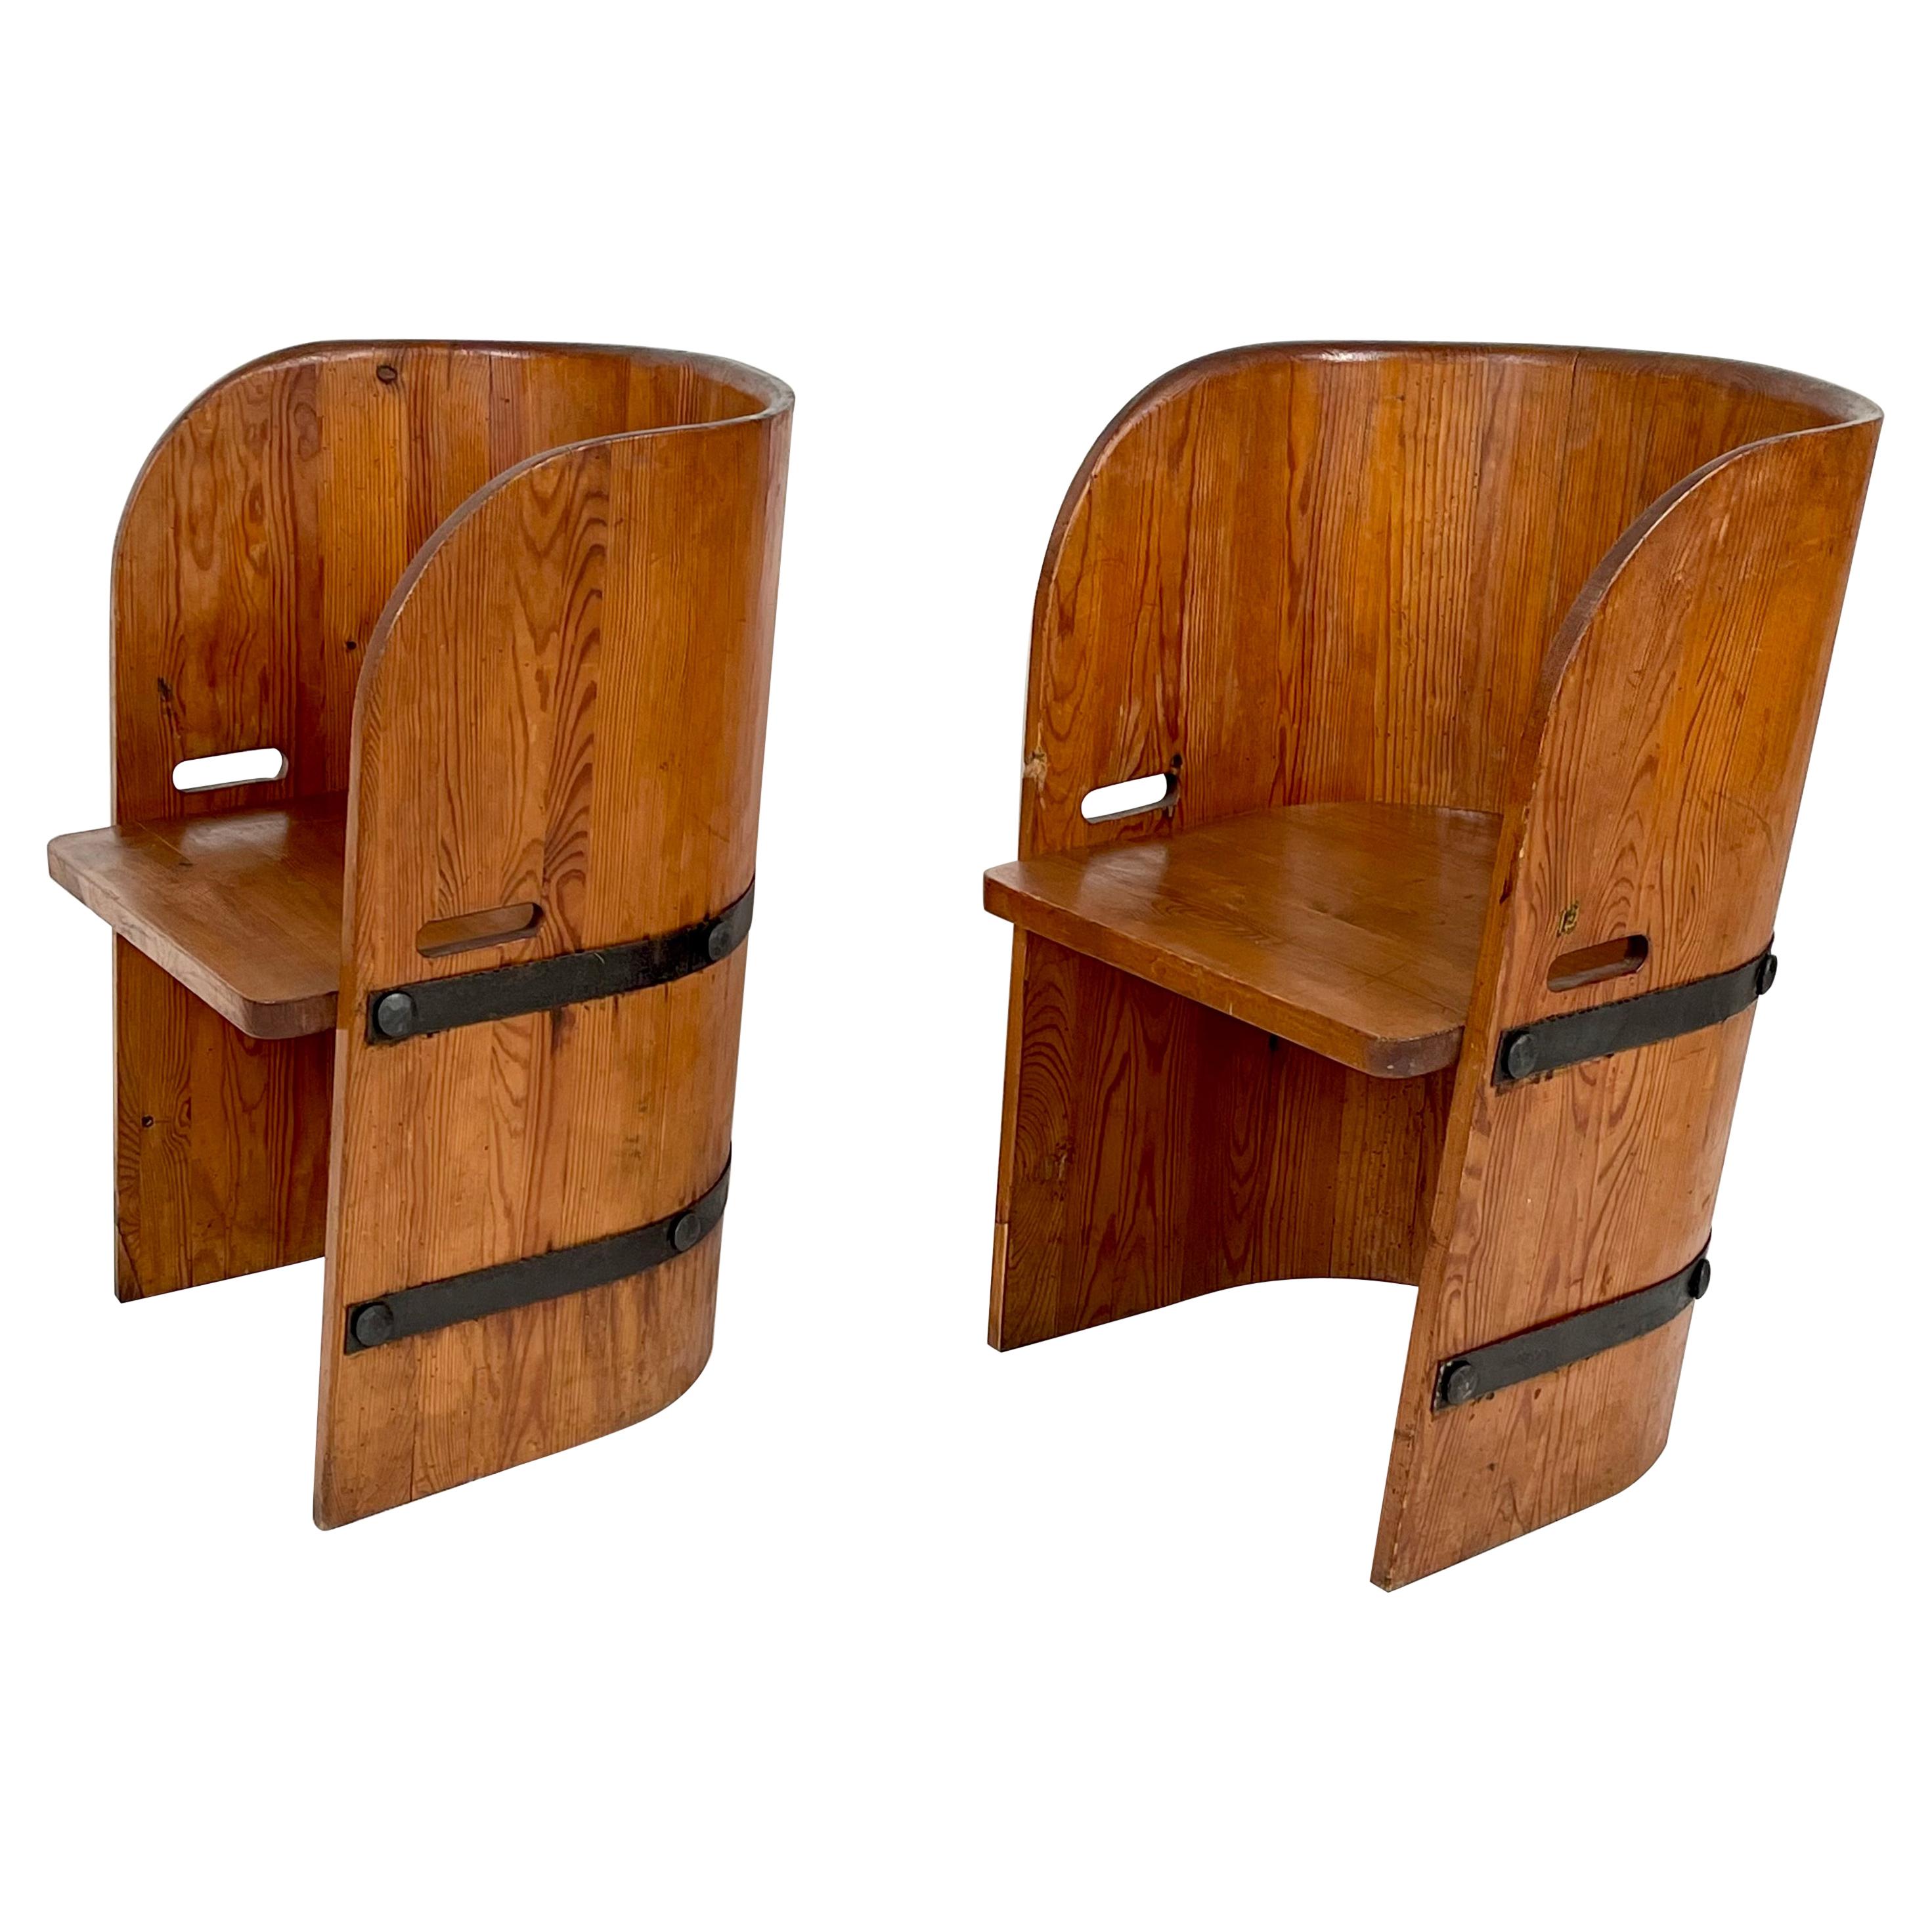 Axel-Einar Hjorth, Attributed, Pair of Solid Pine & Armchairs, Sweden, 1930-40s